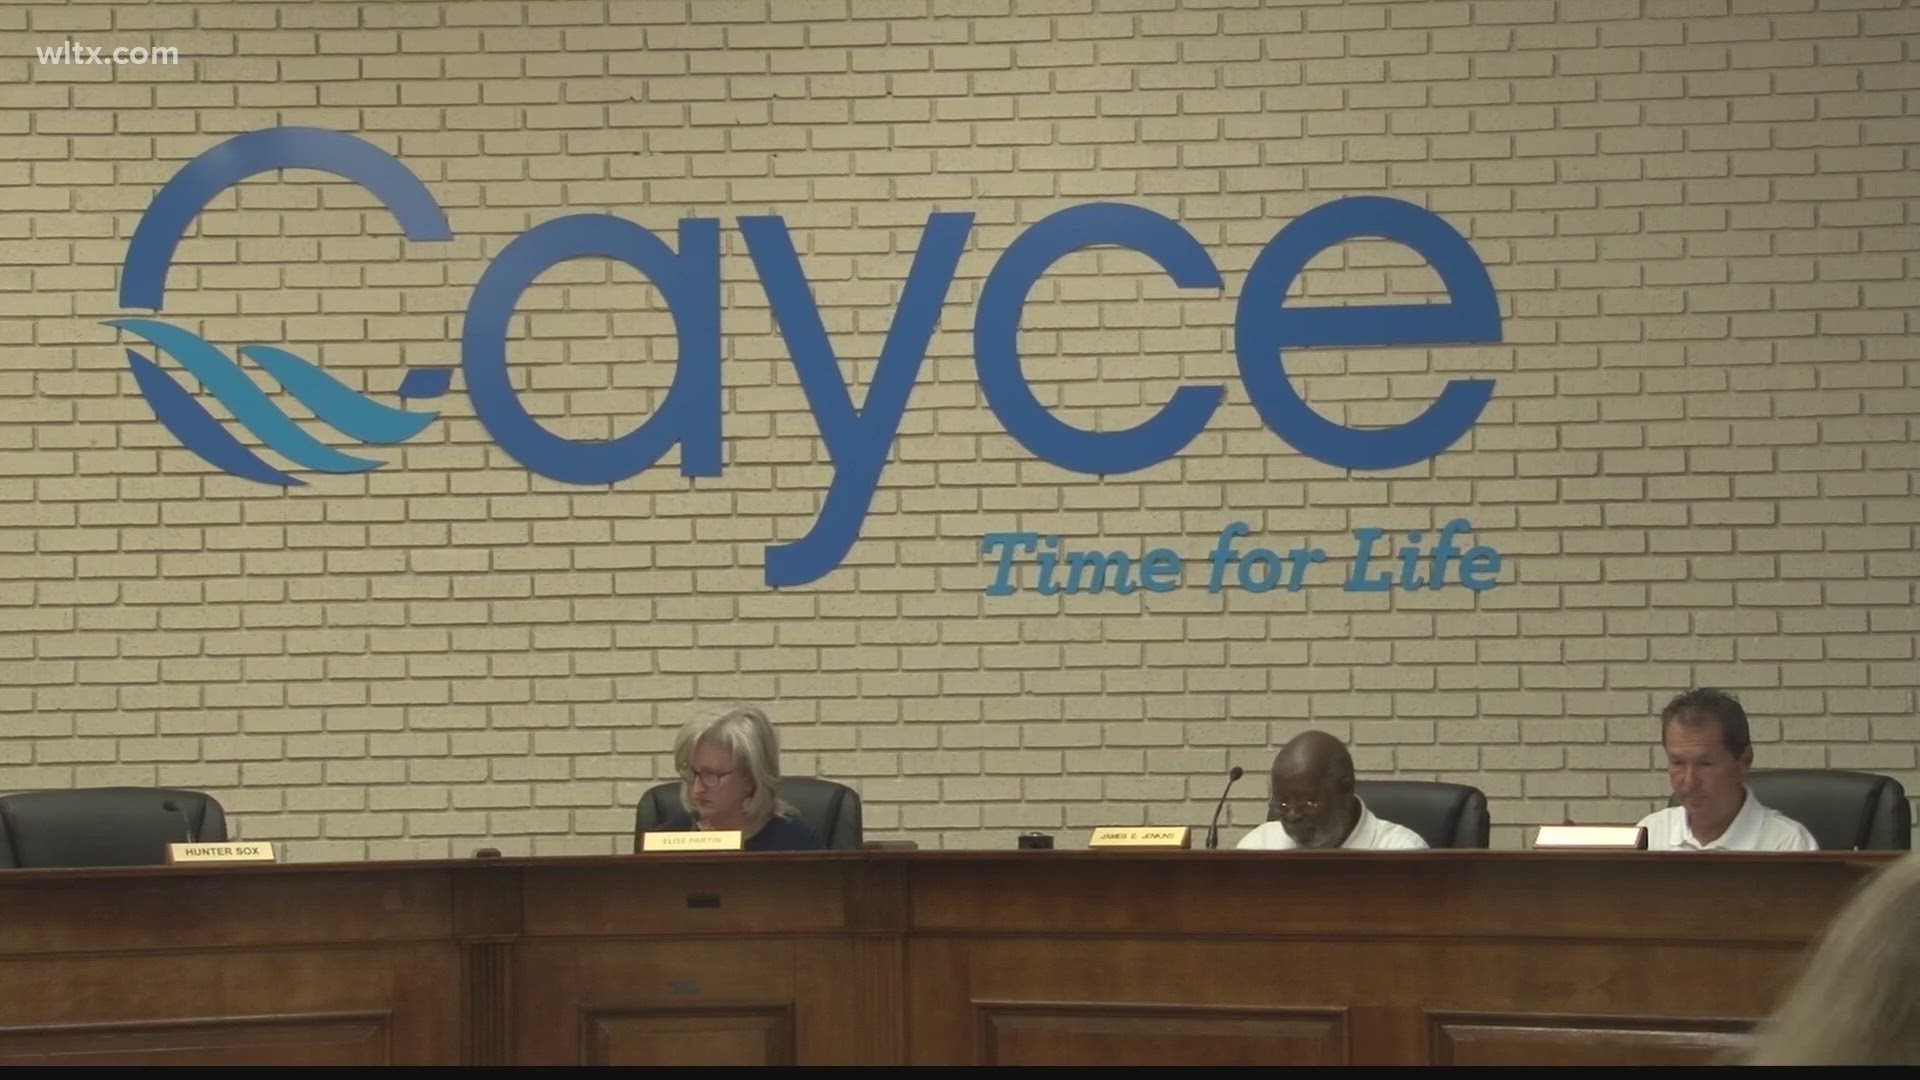 With his staff seeing an average of 1 to 2 overdoses per week, Cayce's fire chief is hoping an new approach to the problem will pay off.